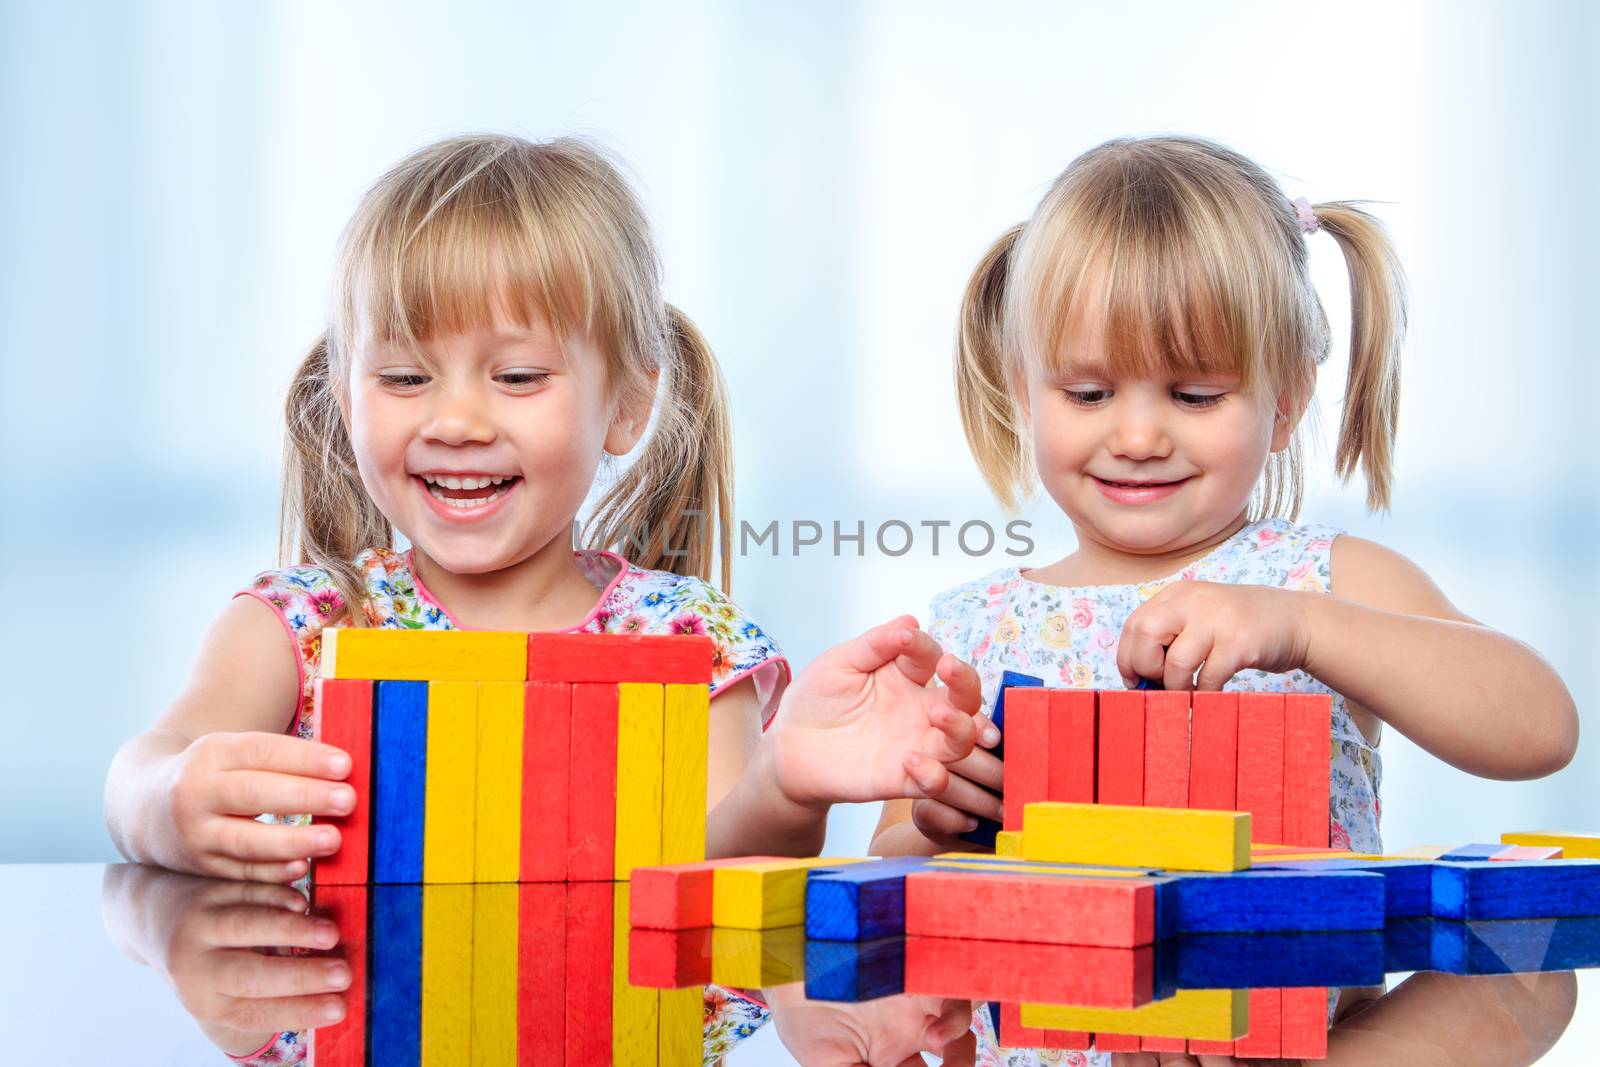 Close up portrait of two little girls playing with colorful wooden pieces at table.
